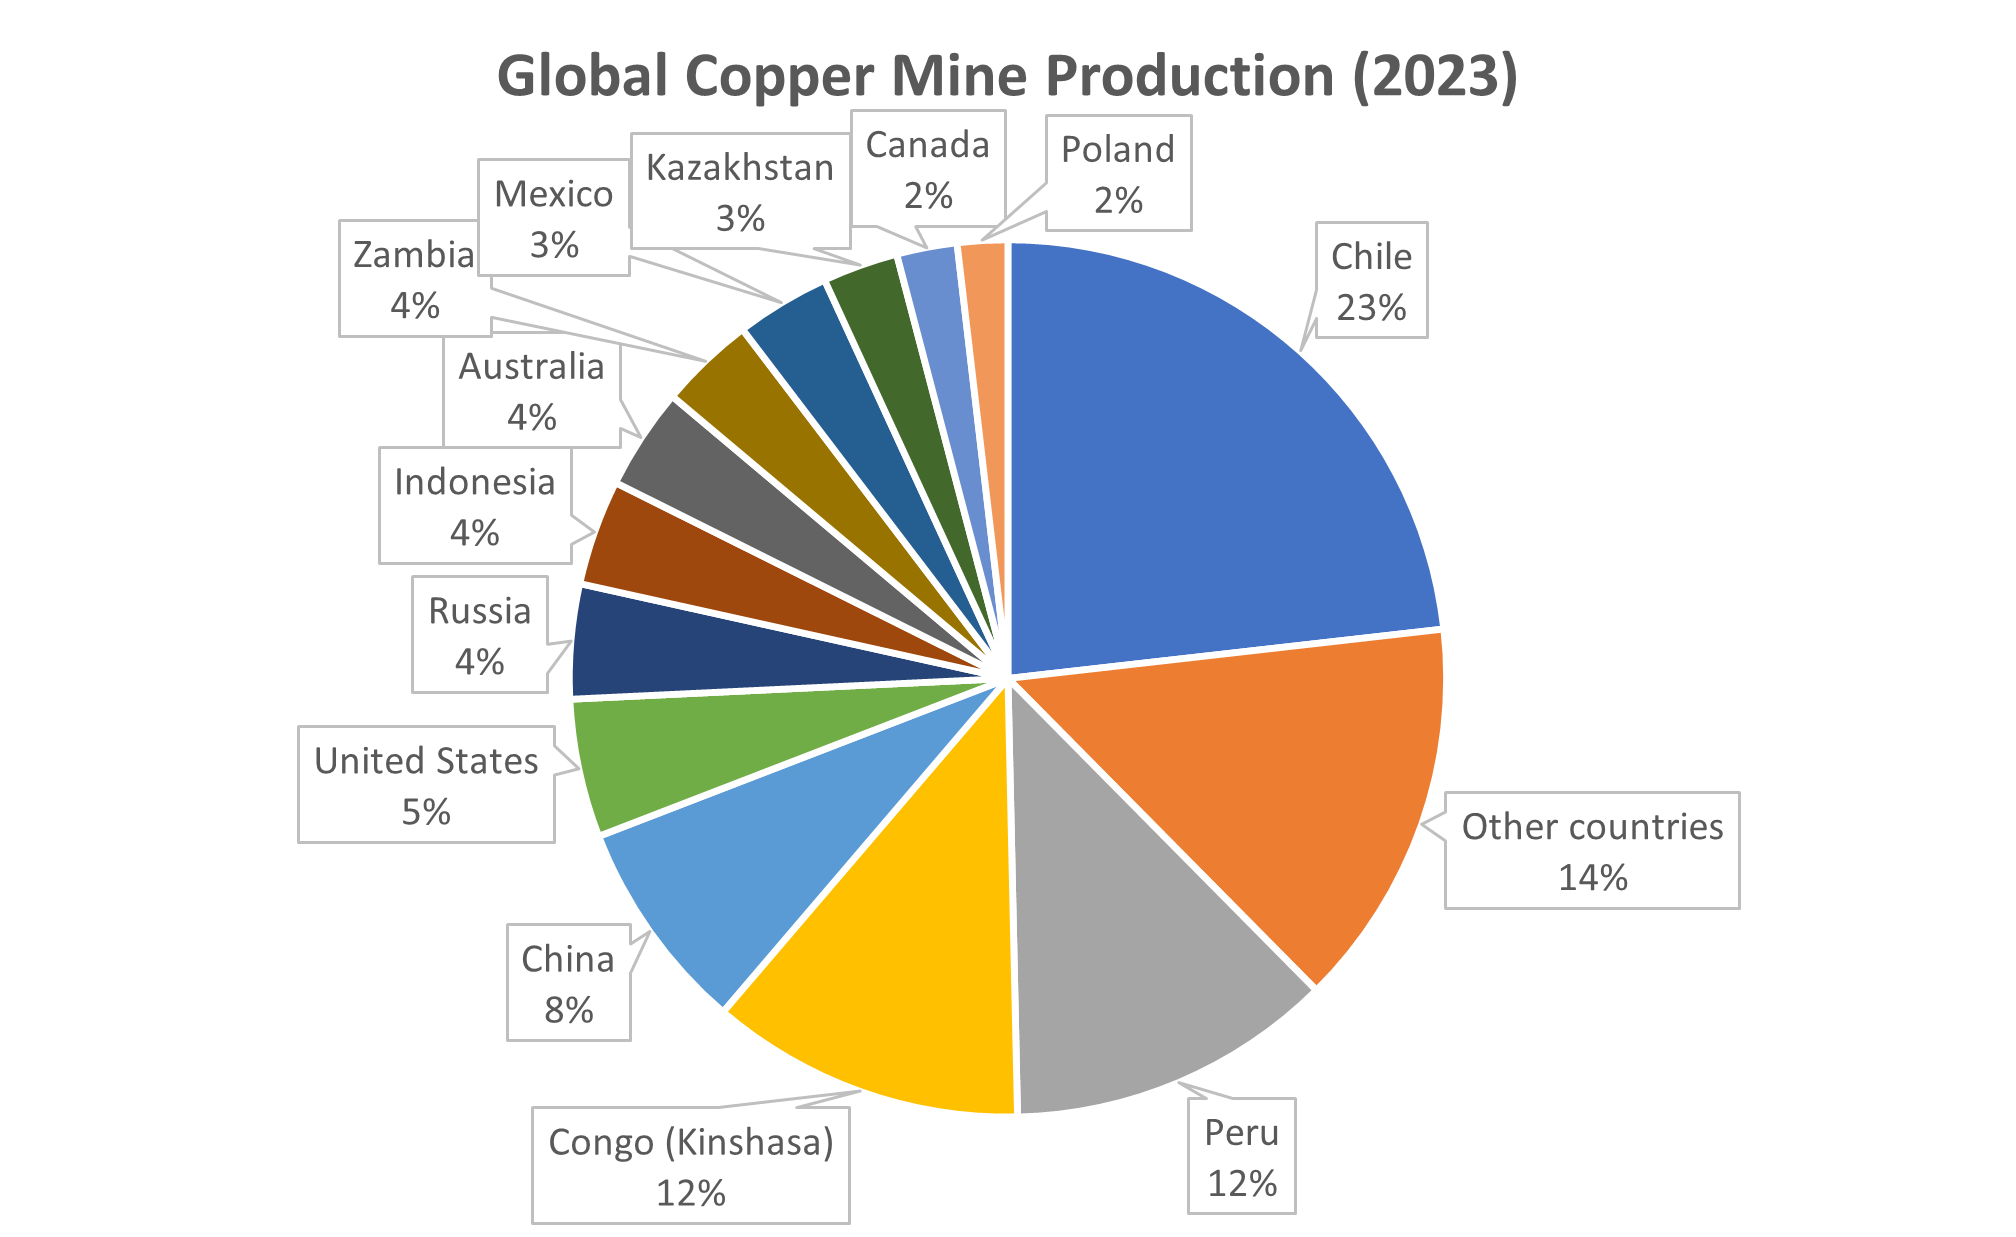 Gobal copper mine production is diversified but dominated by Chile, Peru and the Congo. Source: USGS